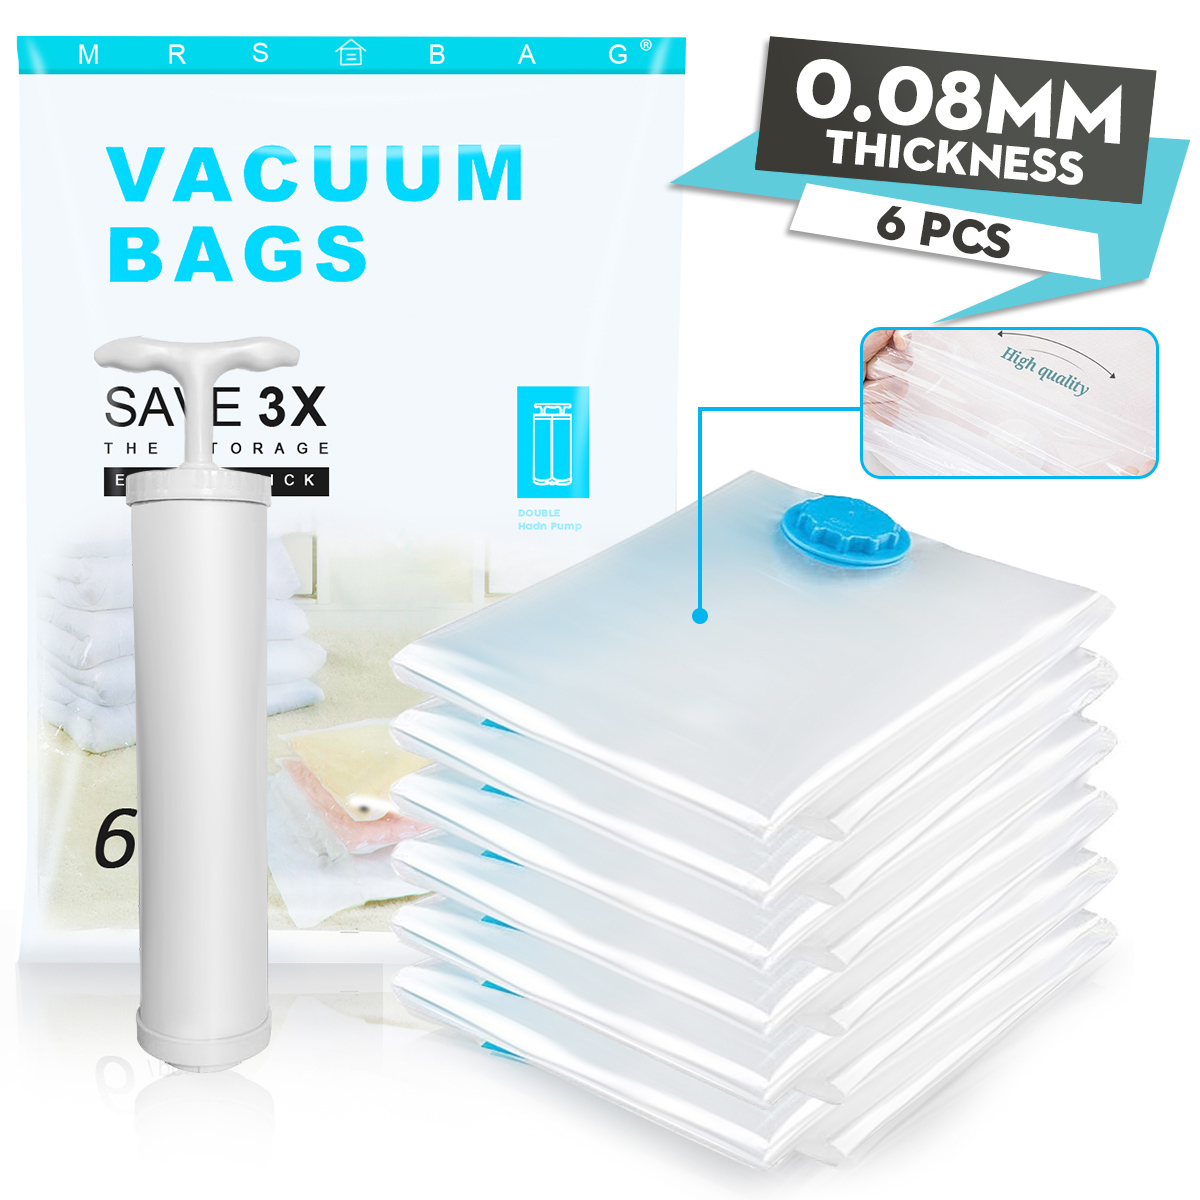 6PC-Vacuum-Bag-Set-Travel-Compressed-Package-Foldable-Clothes-Organizer-Home-Organizer-Seal-Storage--1627761-1